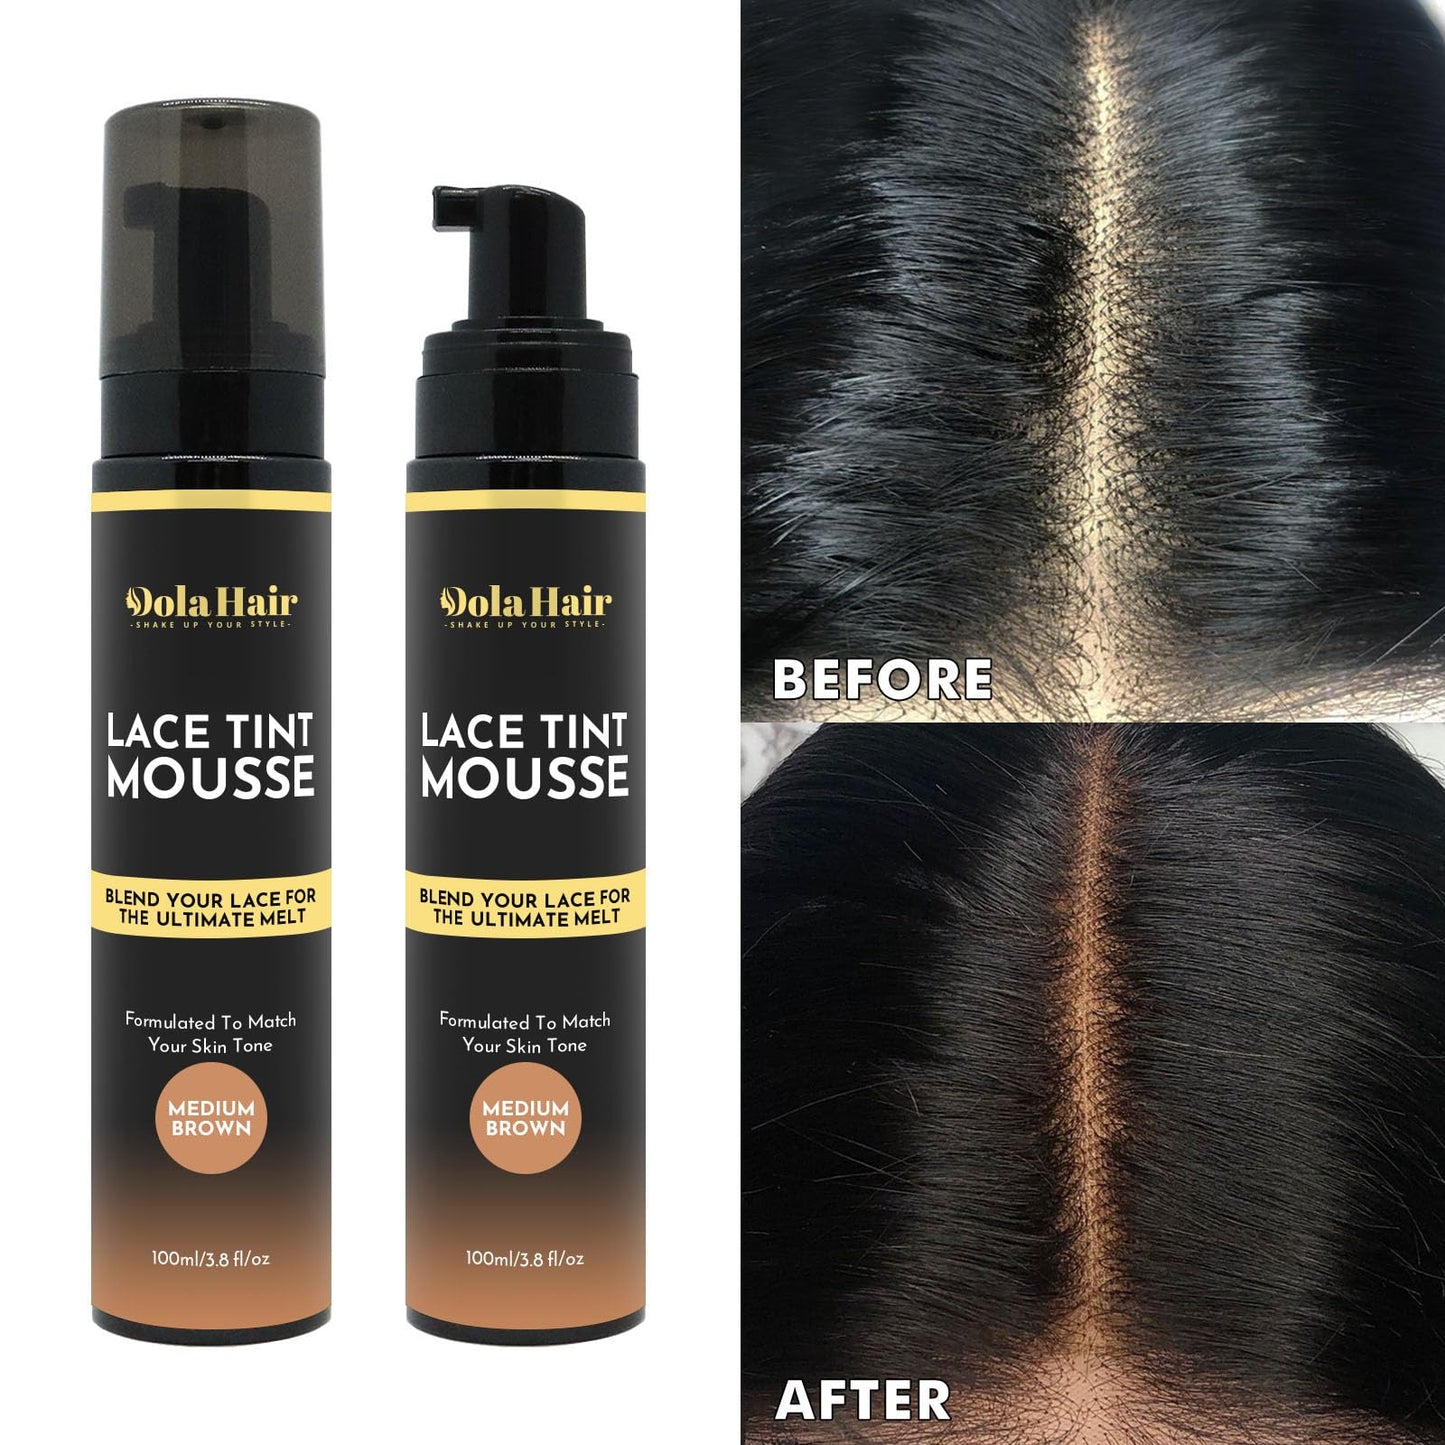 Dolahair Lace Tint Spray for Wigs Melt, Medium Brown Wig Tint Lace Spray Lace Melting Foam Lace Tint Mousse for Wigs Melt Lace Wigs Melting with 2 Pcs Lace Melting Band, Elastic Bands for Wigs